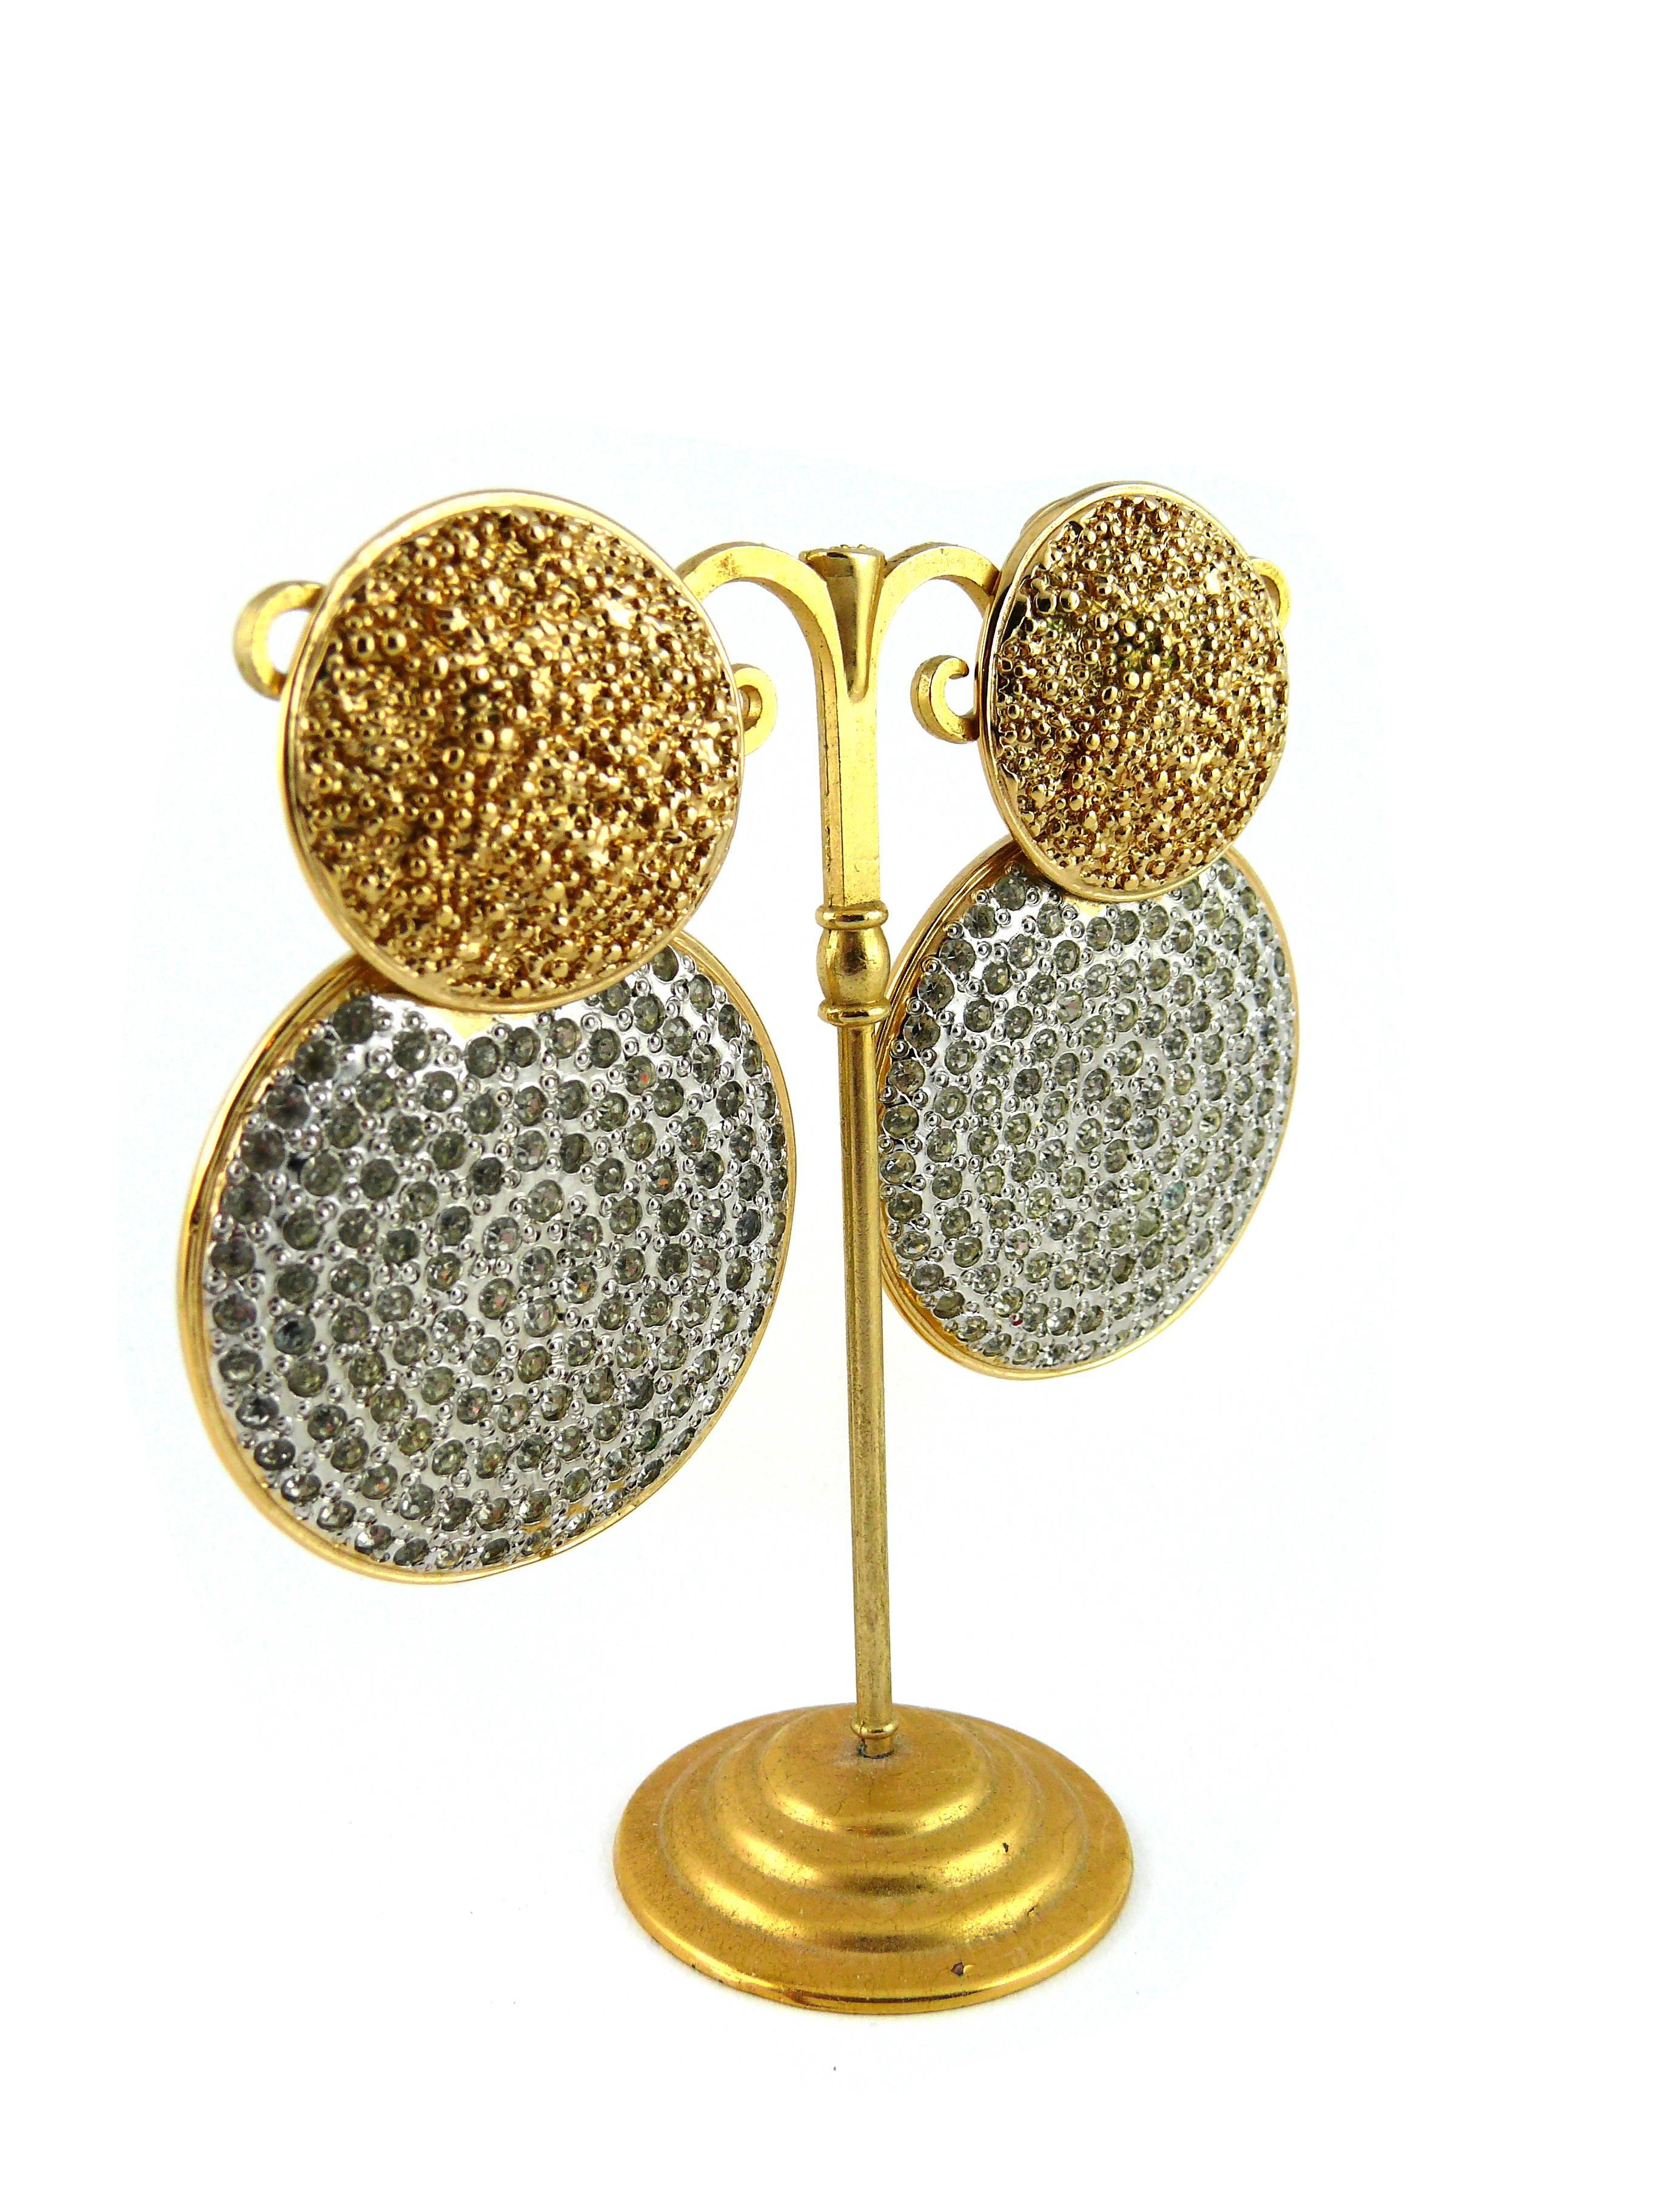 YVES SAINT LAURENT vintage massive jewelled dangling disc earrings.

These rare statement earrings feature two gold tone discs with crystal embellishement.

Embossed YSL.

JEWELRY CONDITION CHART
- New or never worn : item is in pristine